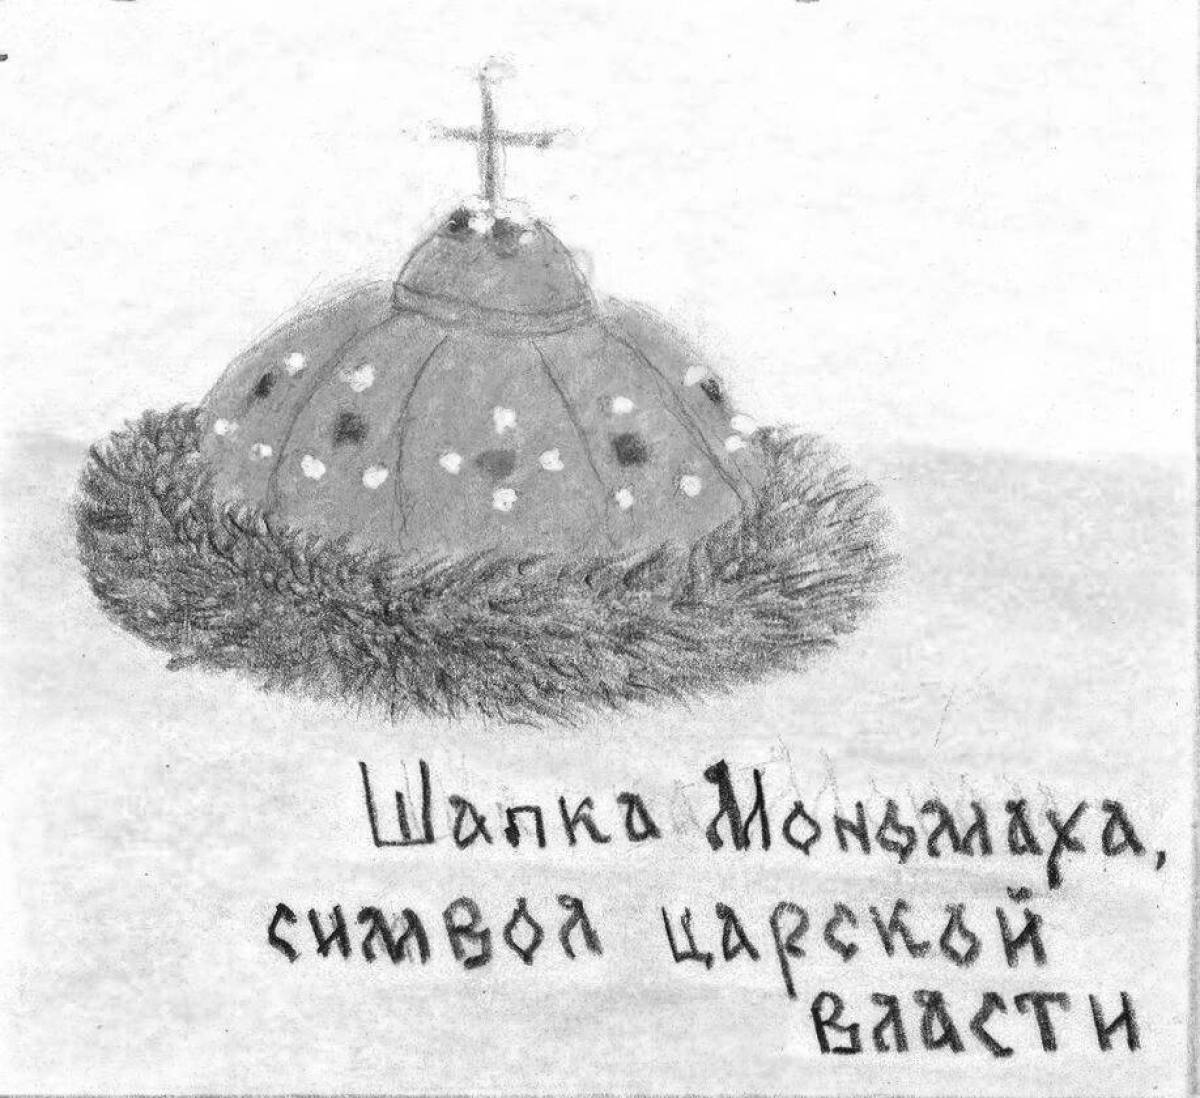 Inviting coloring monomakh hat